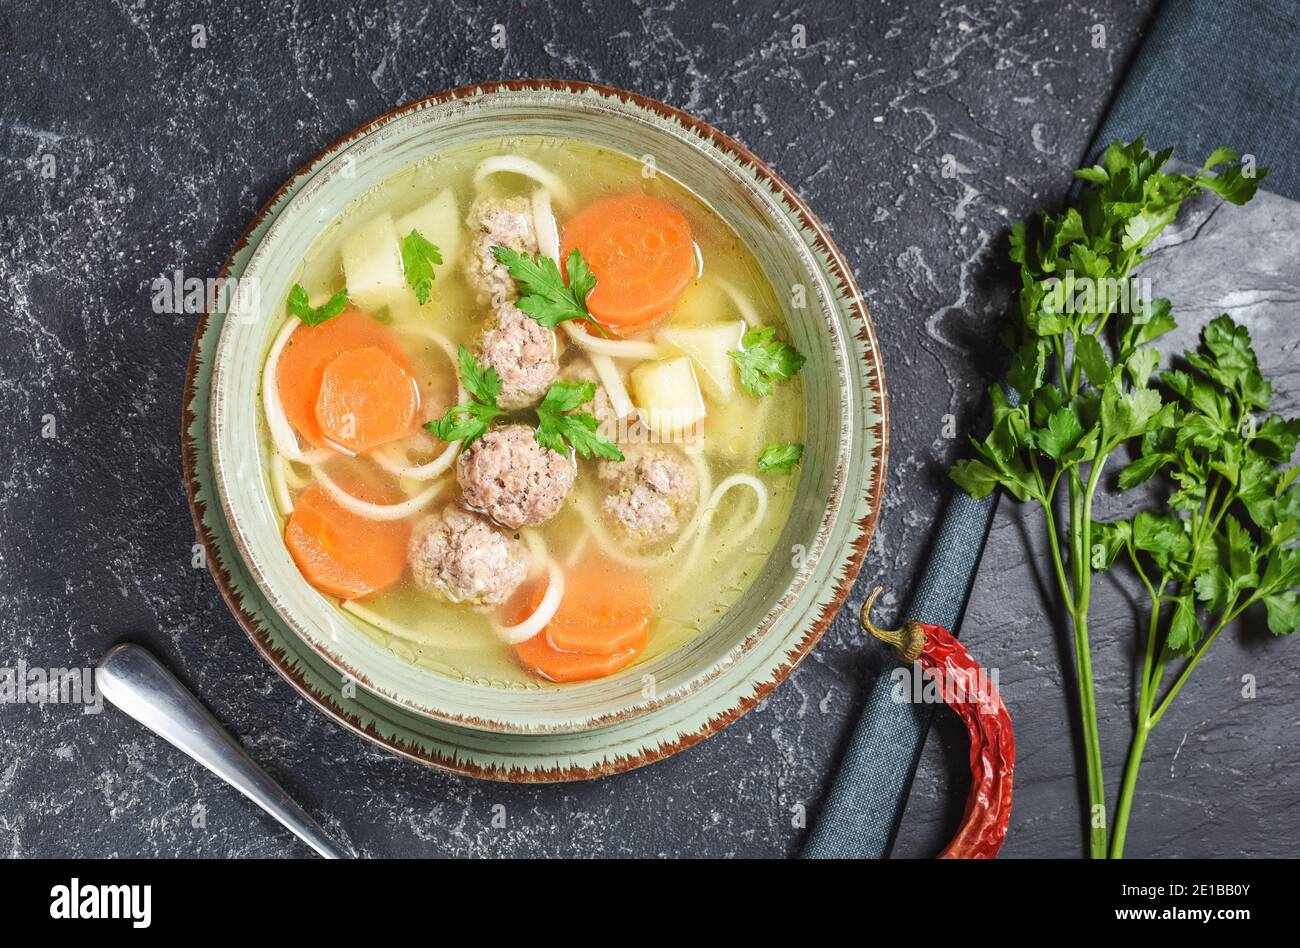 Meatball soup and ingredients on black stone table. Top view. Stock Photo